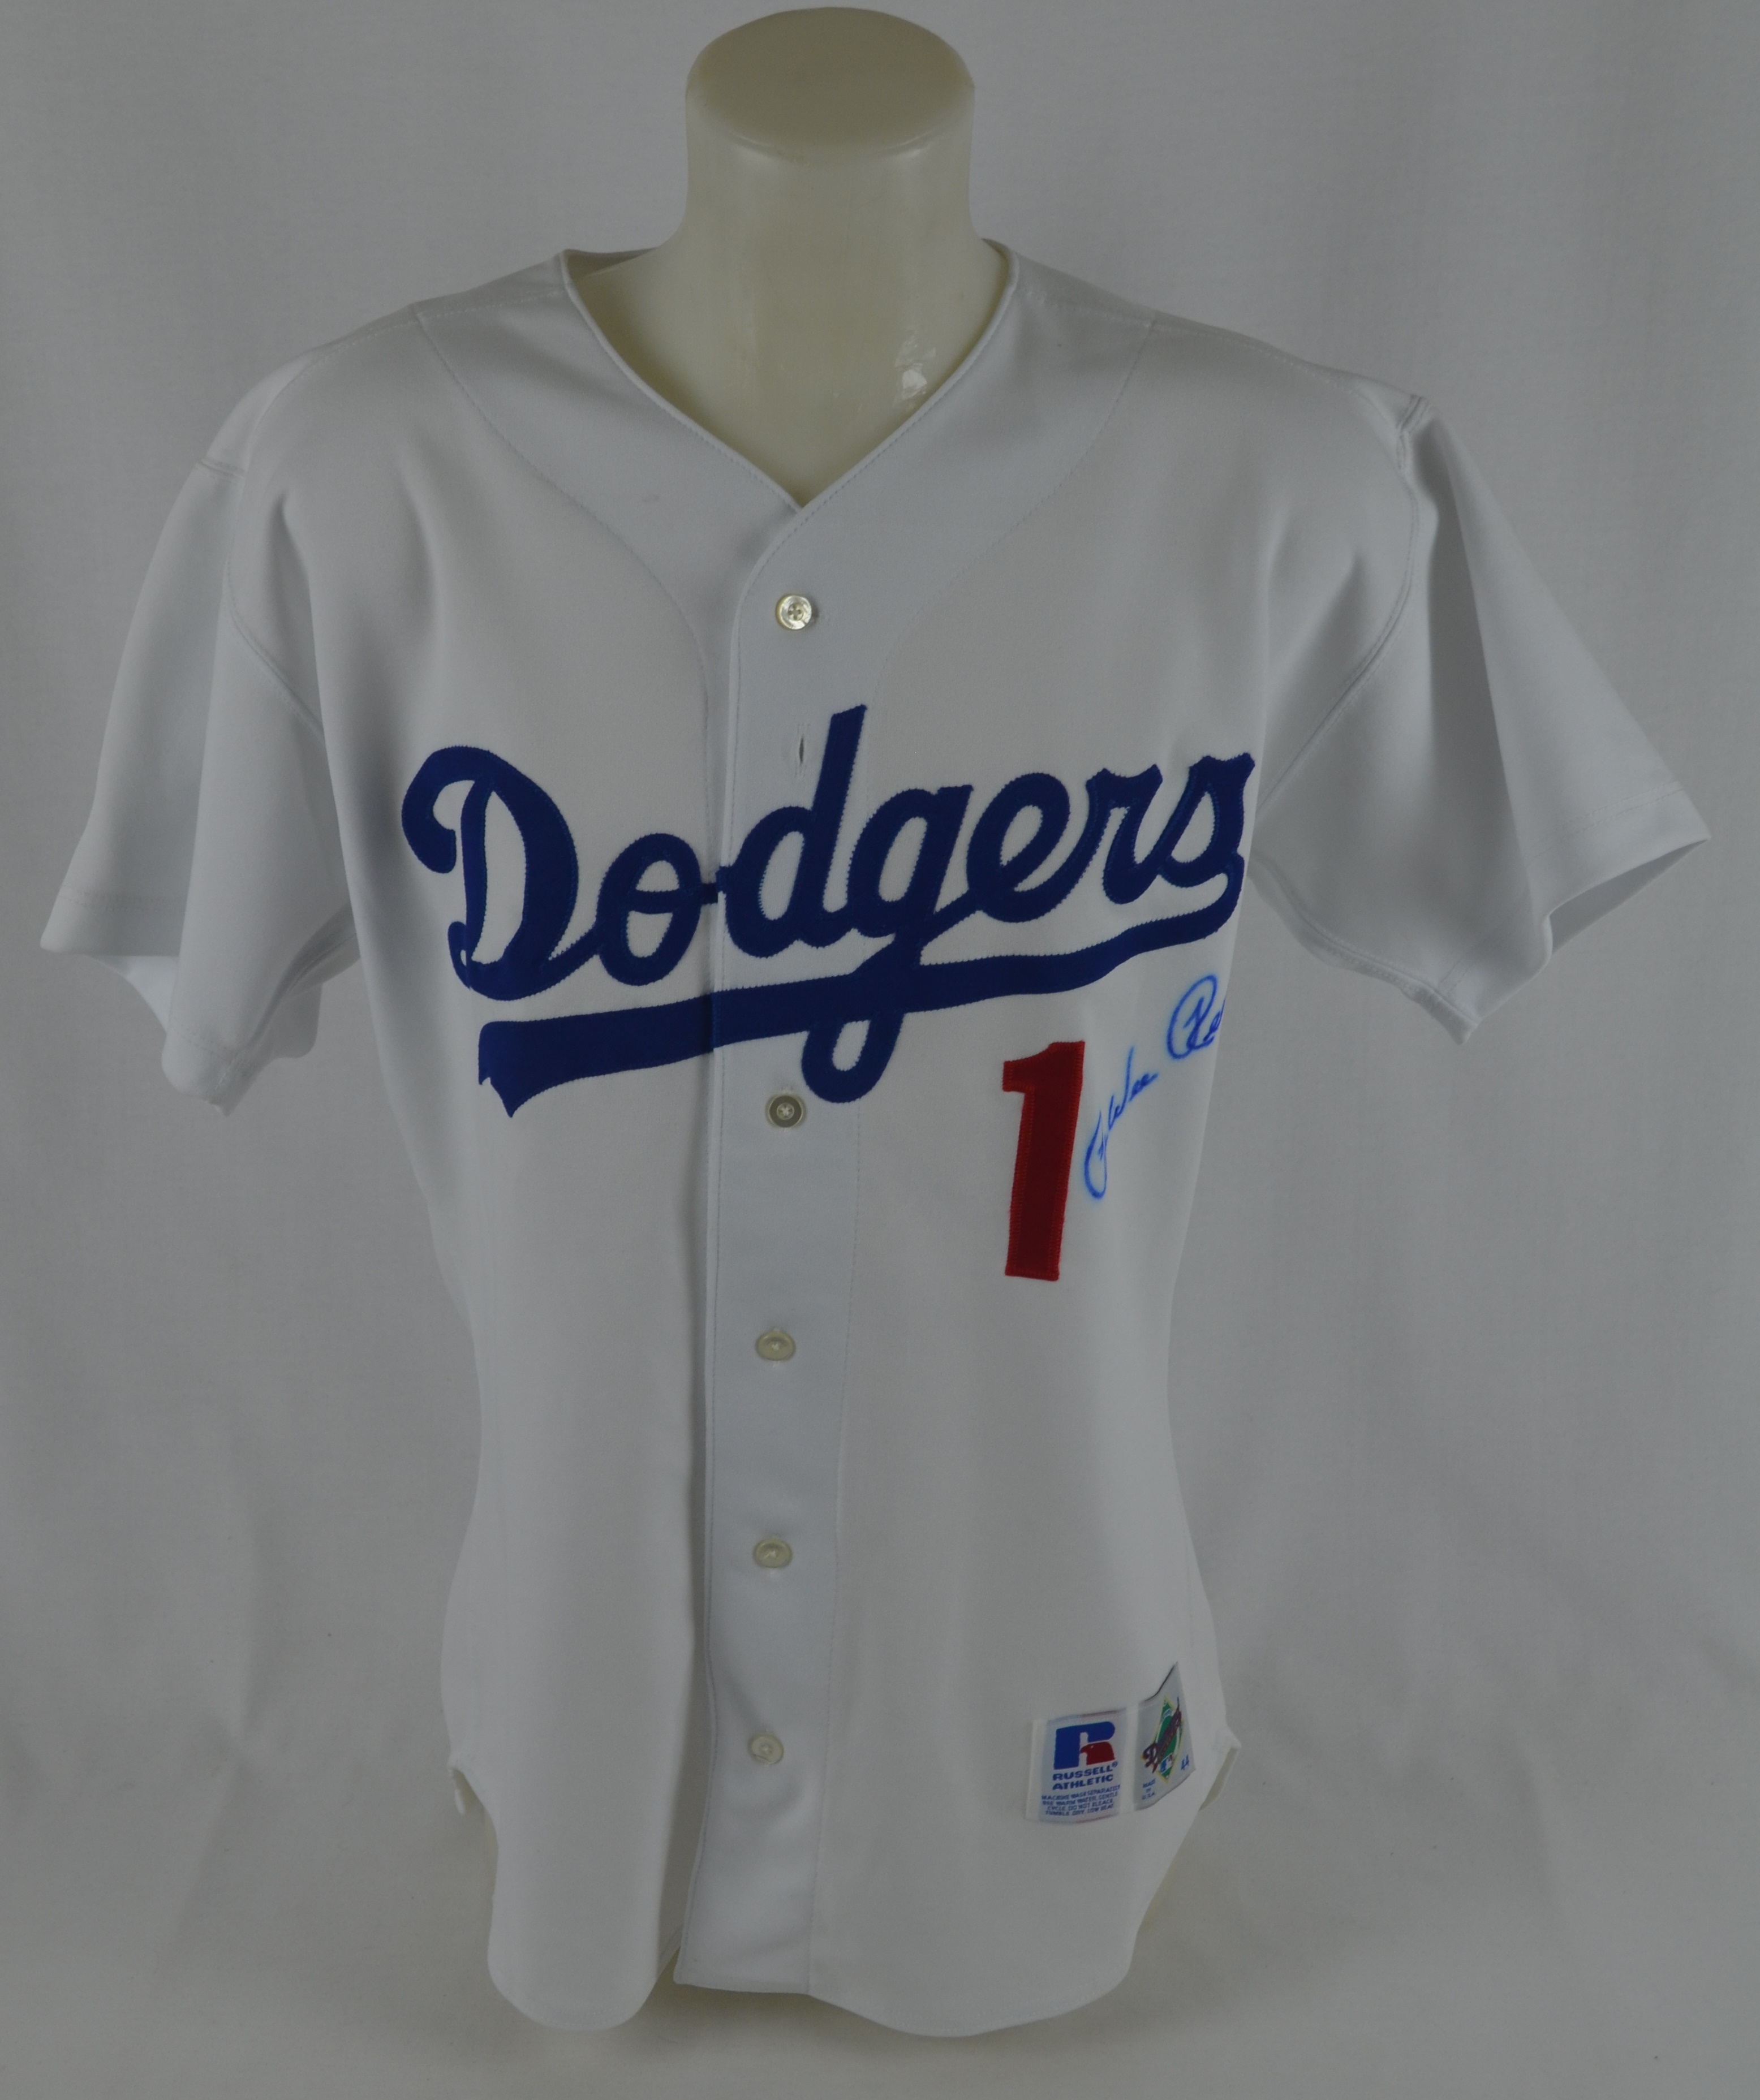 russell athletic dodgers jersey